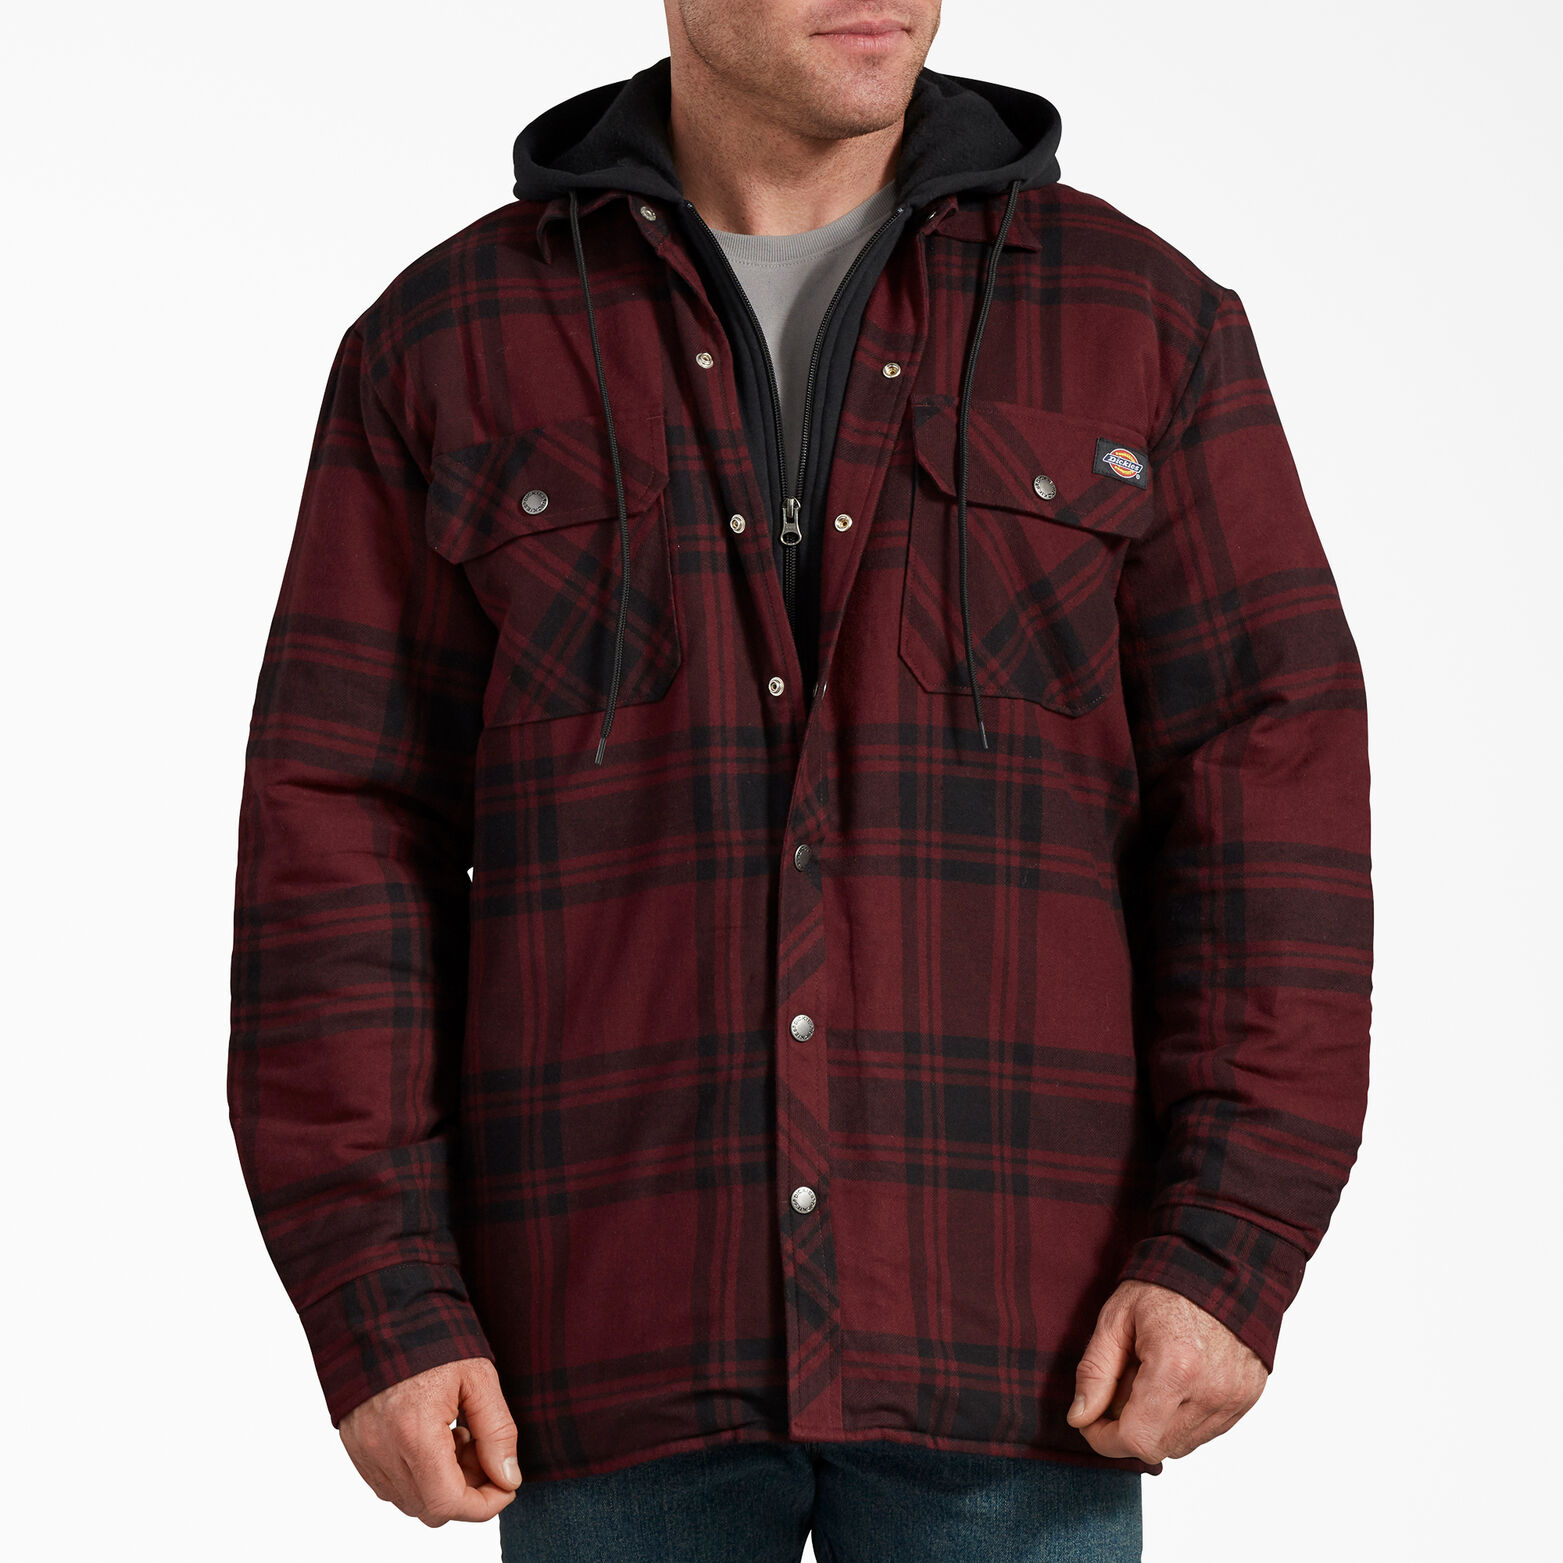 Men's Wrangler® Heavyweight Plaid Sherpa Lined Shirt Jacket | Mens Warm Quilted  Lined Cotton Jackets With Hood Button Down Zipper Long Sleeve Plaid Jackets  